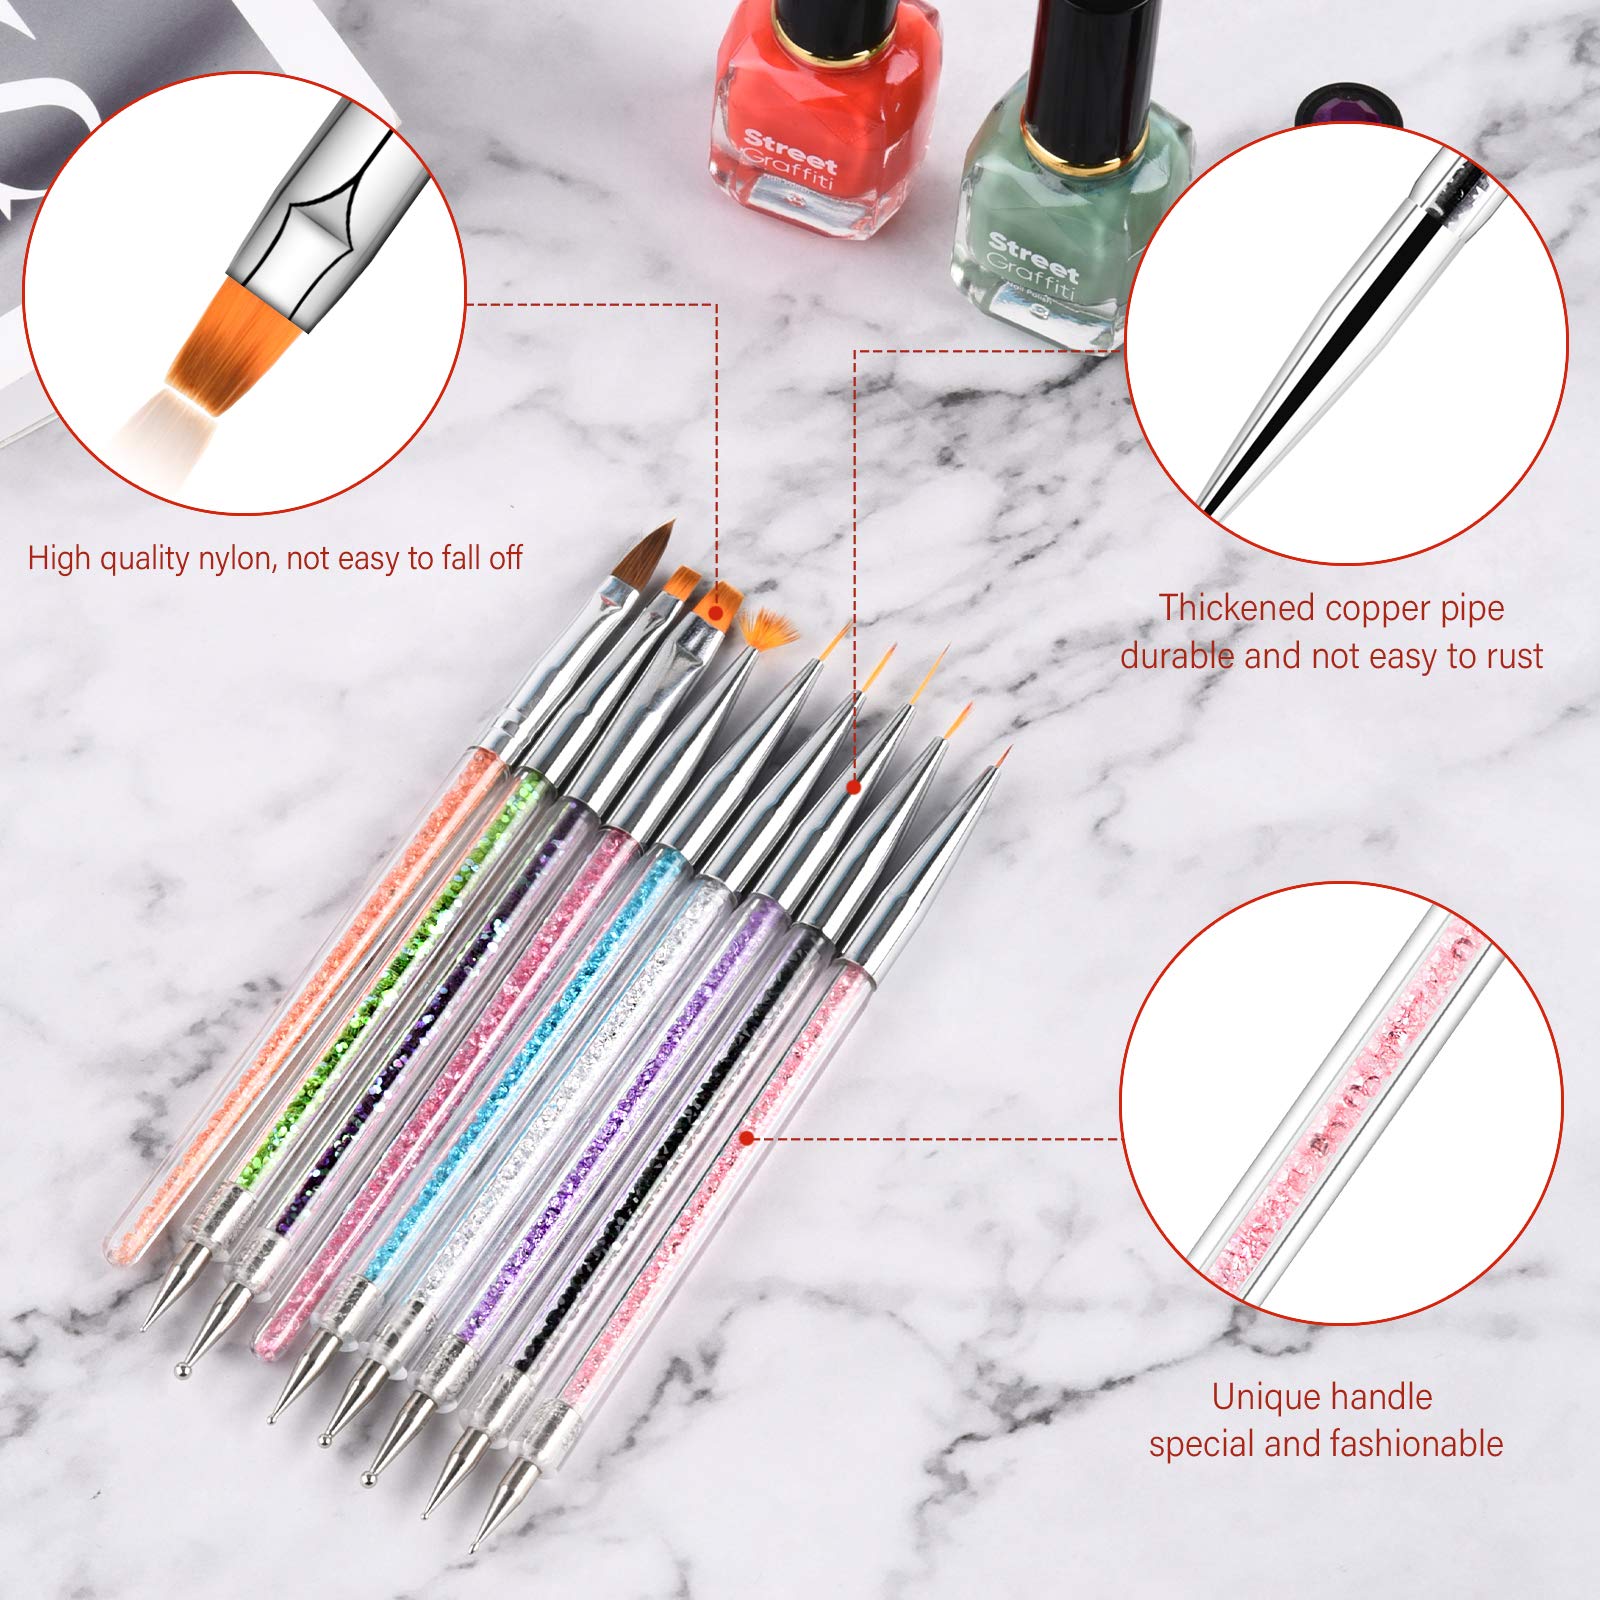 Behind The Brushes: Nail Art Tools Every Enthusiast Needs, Curated By Stylish.ae